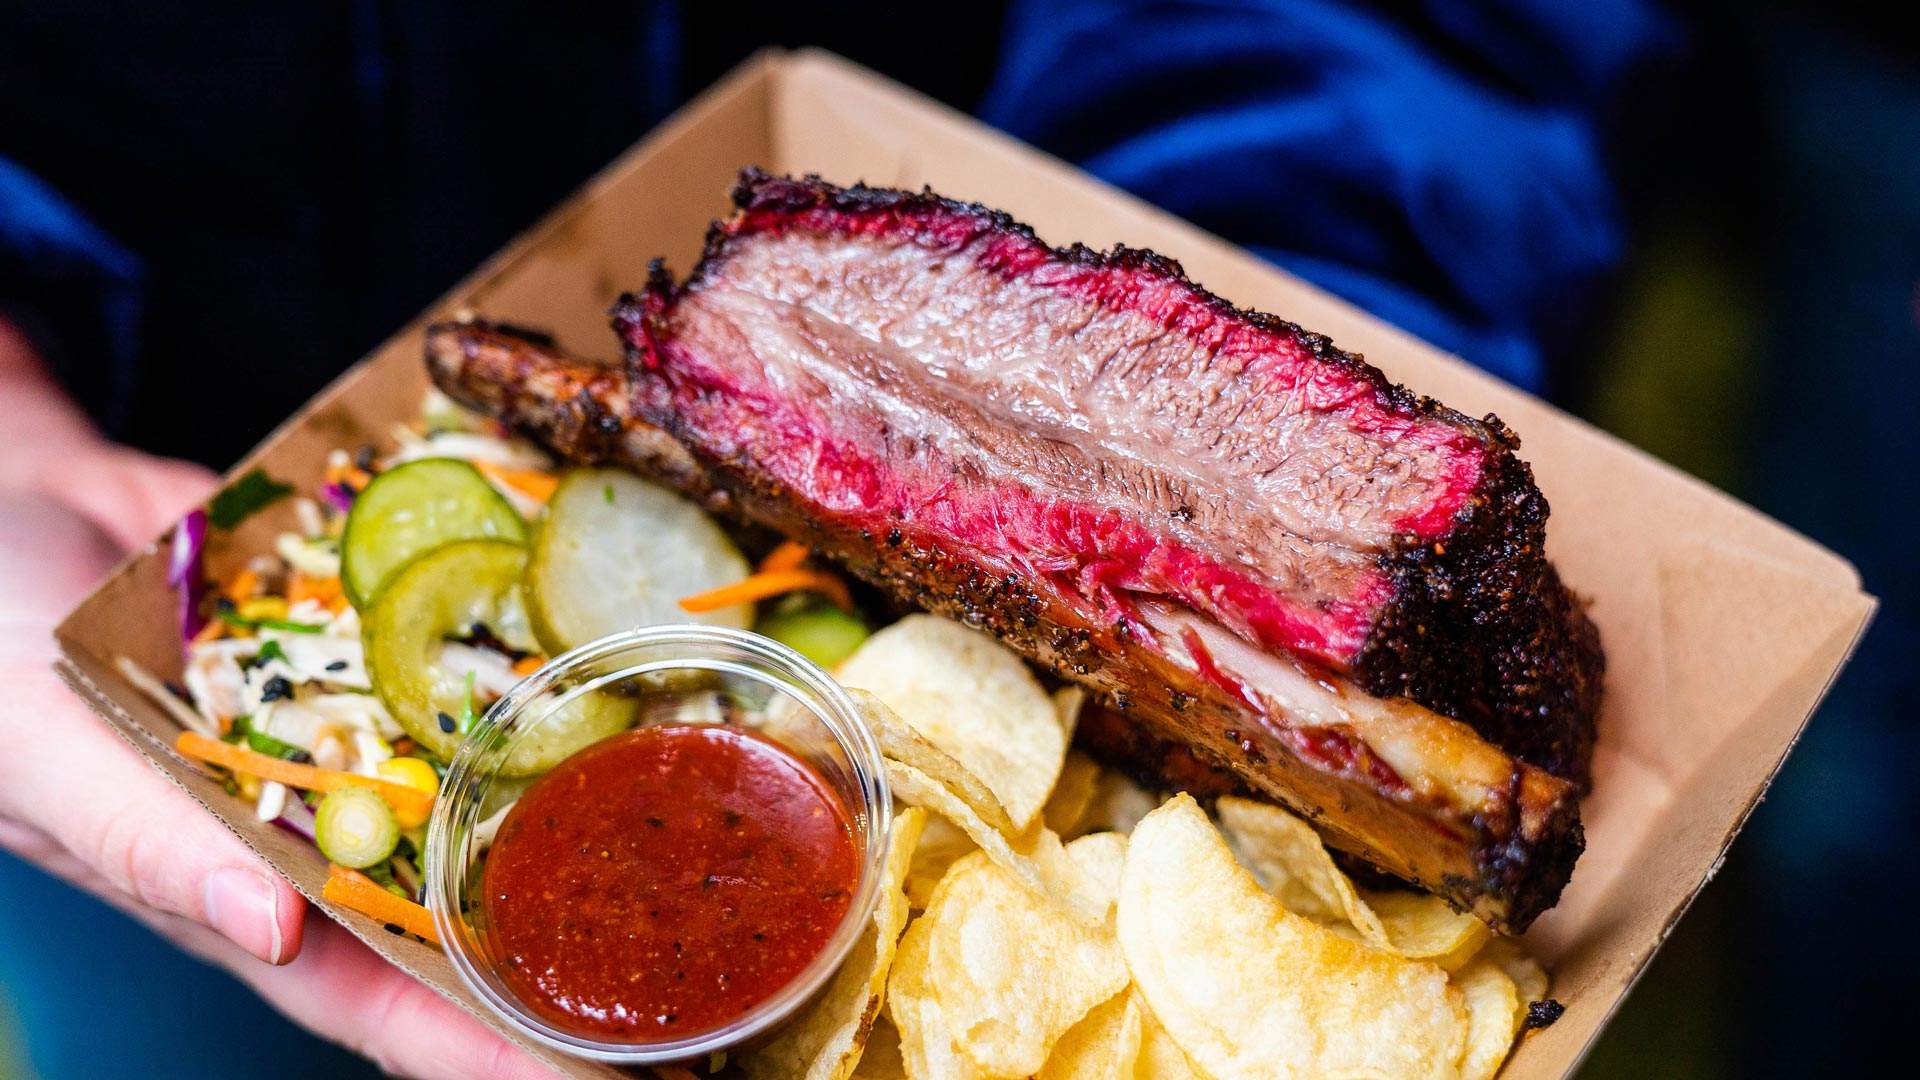 Beef brisket, pickles and slaw from BlackBear BBQ in Sydney